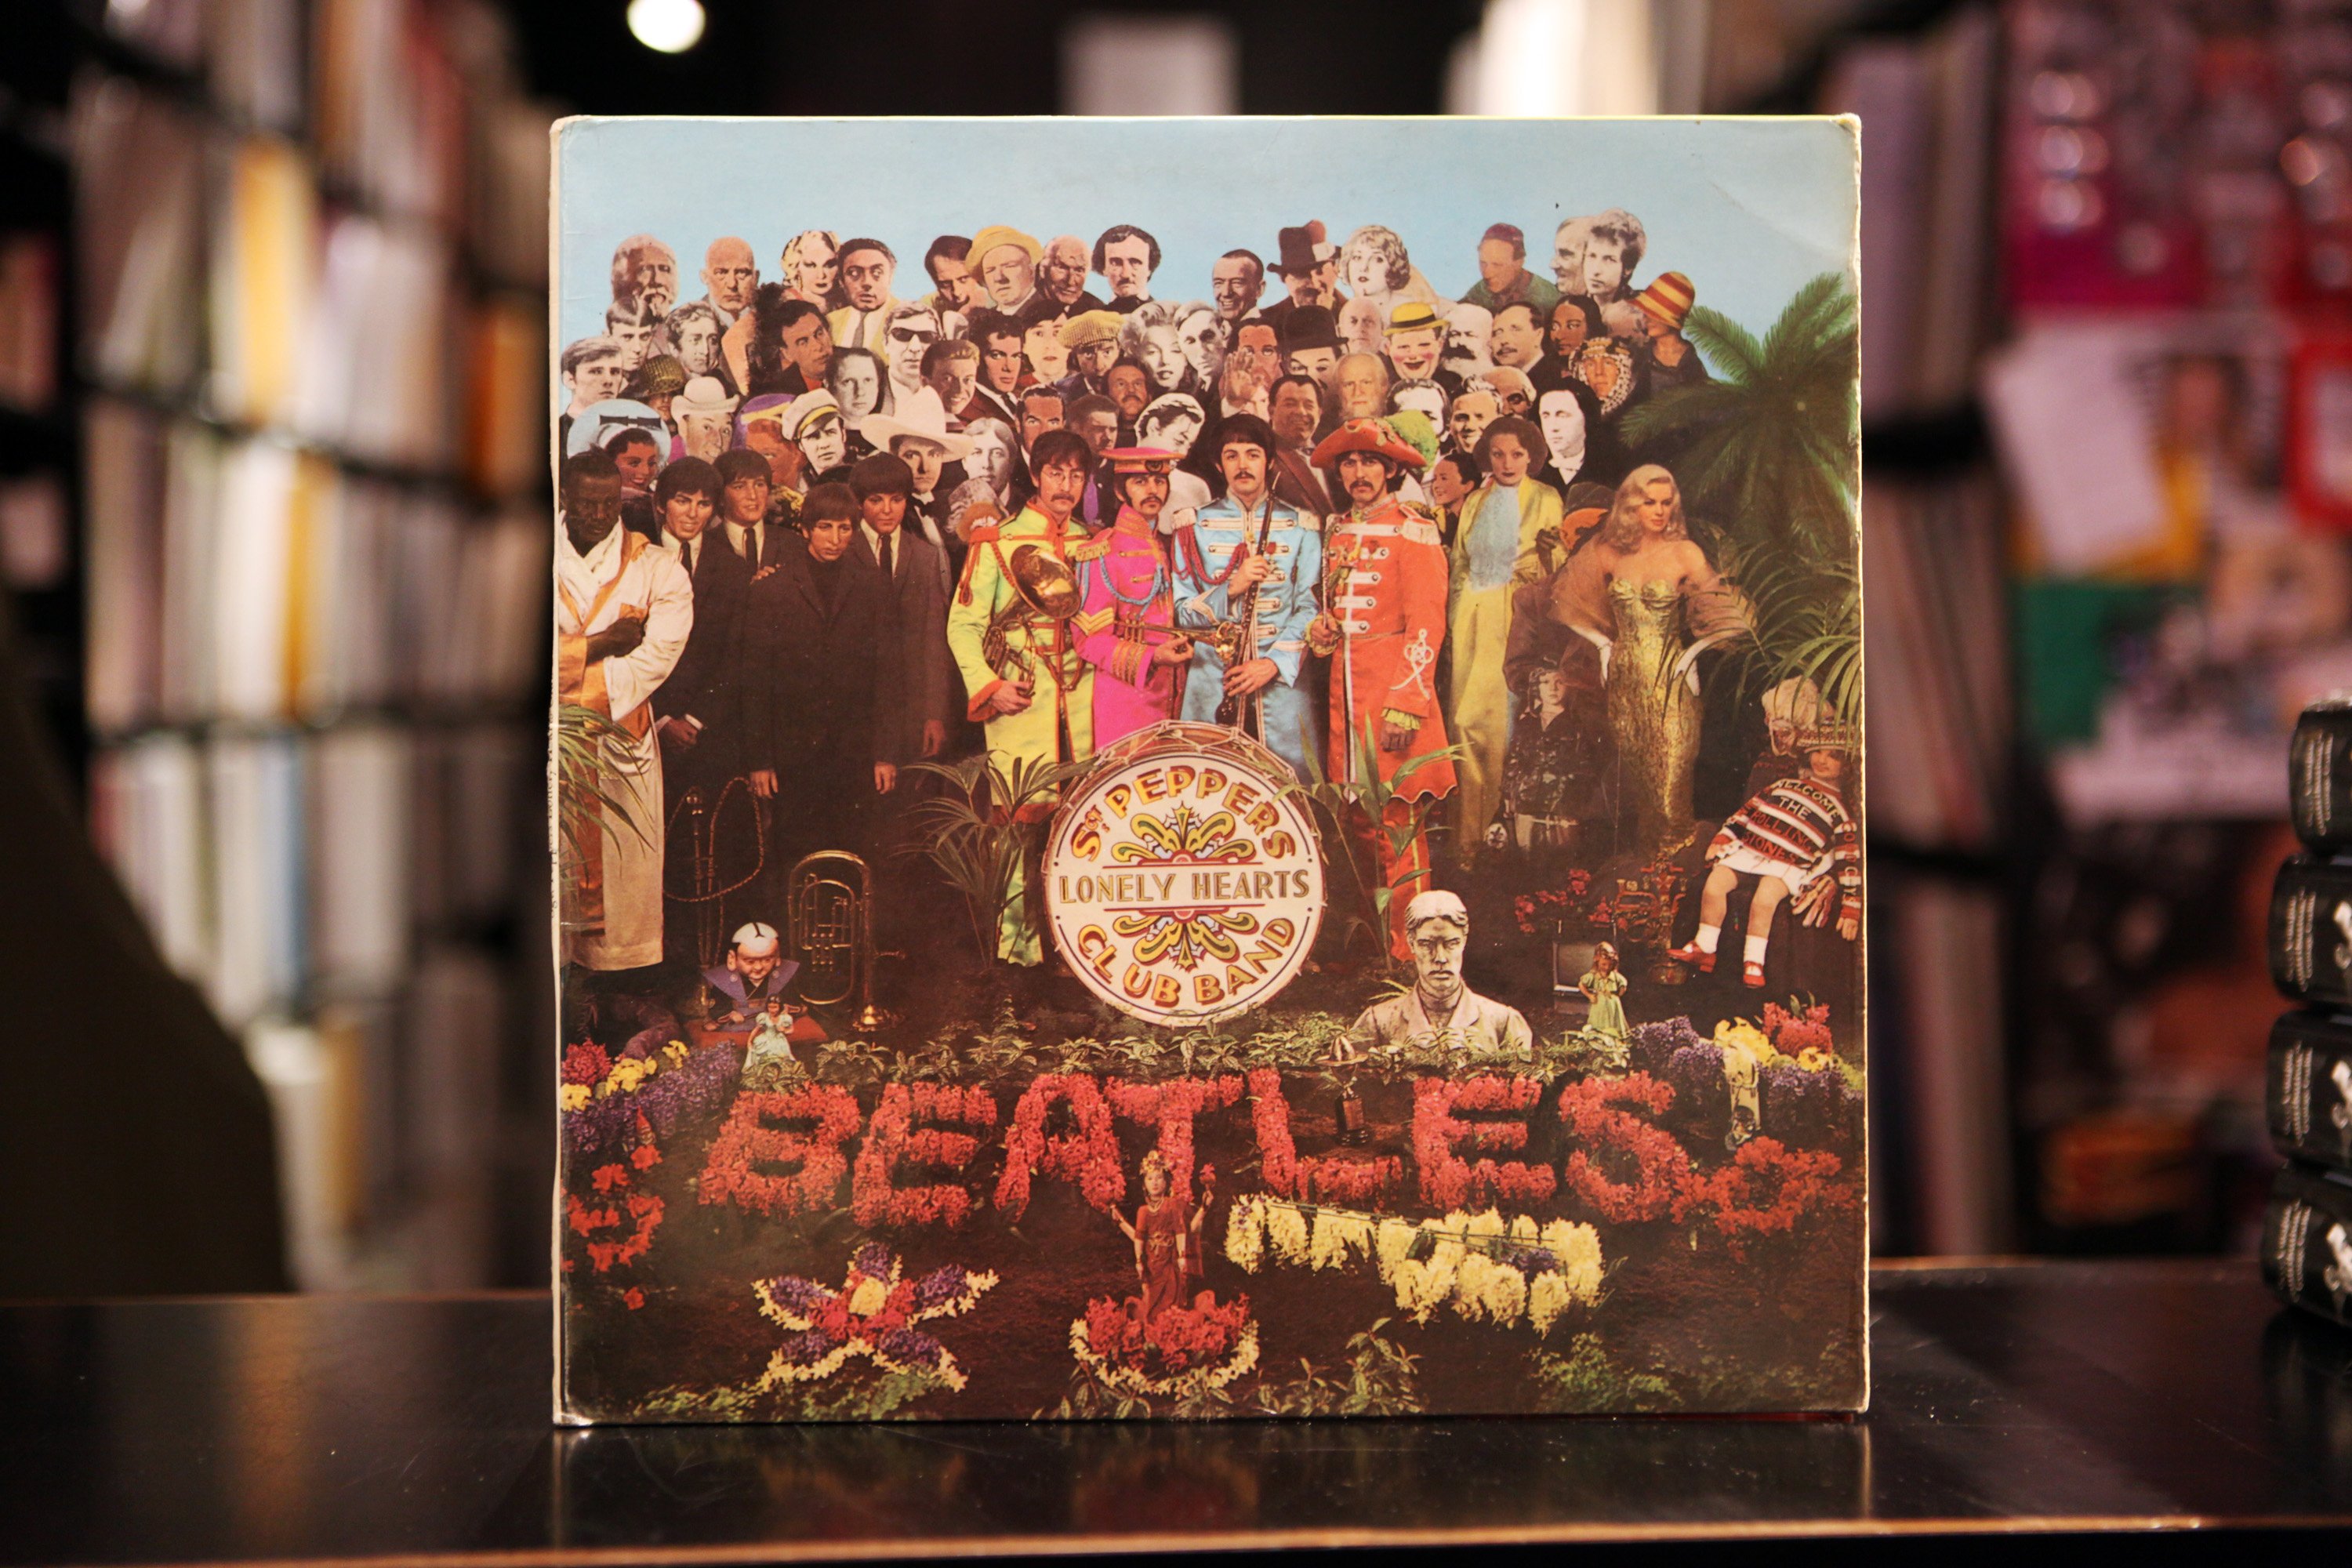 A copy of The Beatles' Sgt. Pepper's Lonely Hearts Club Band standing upright